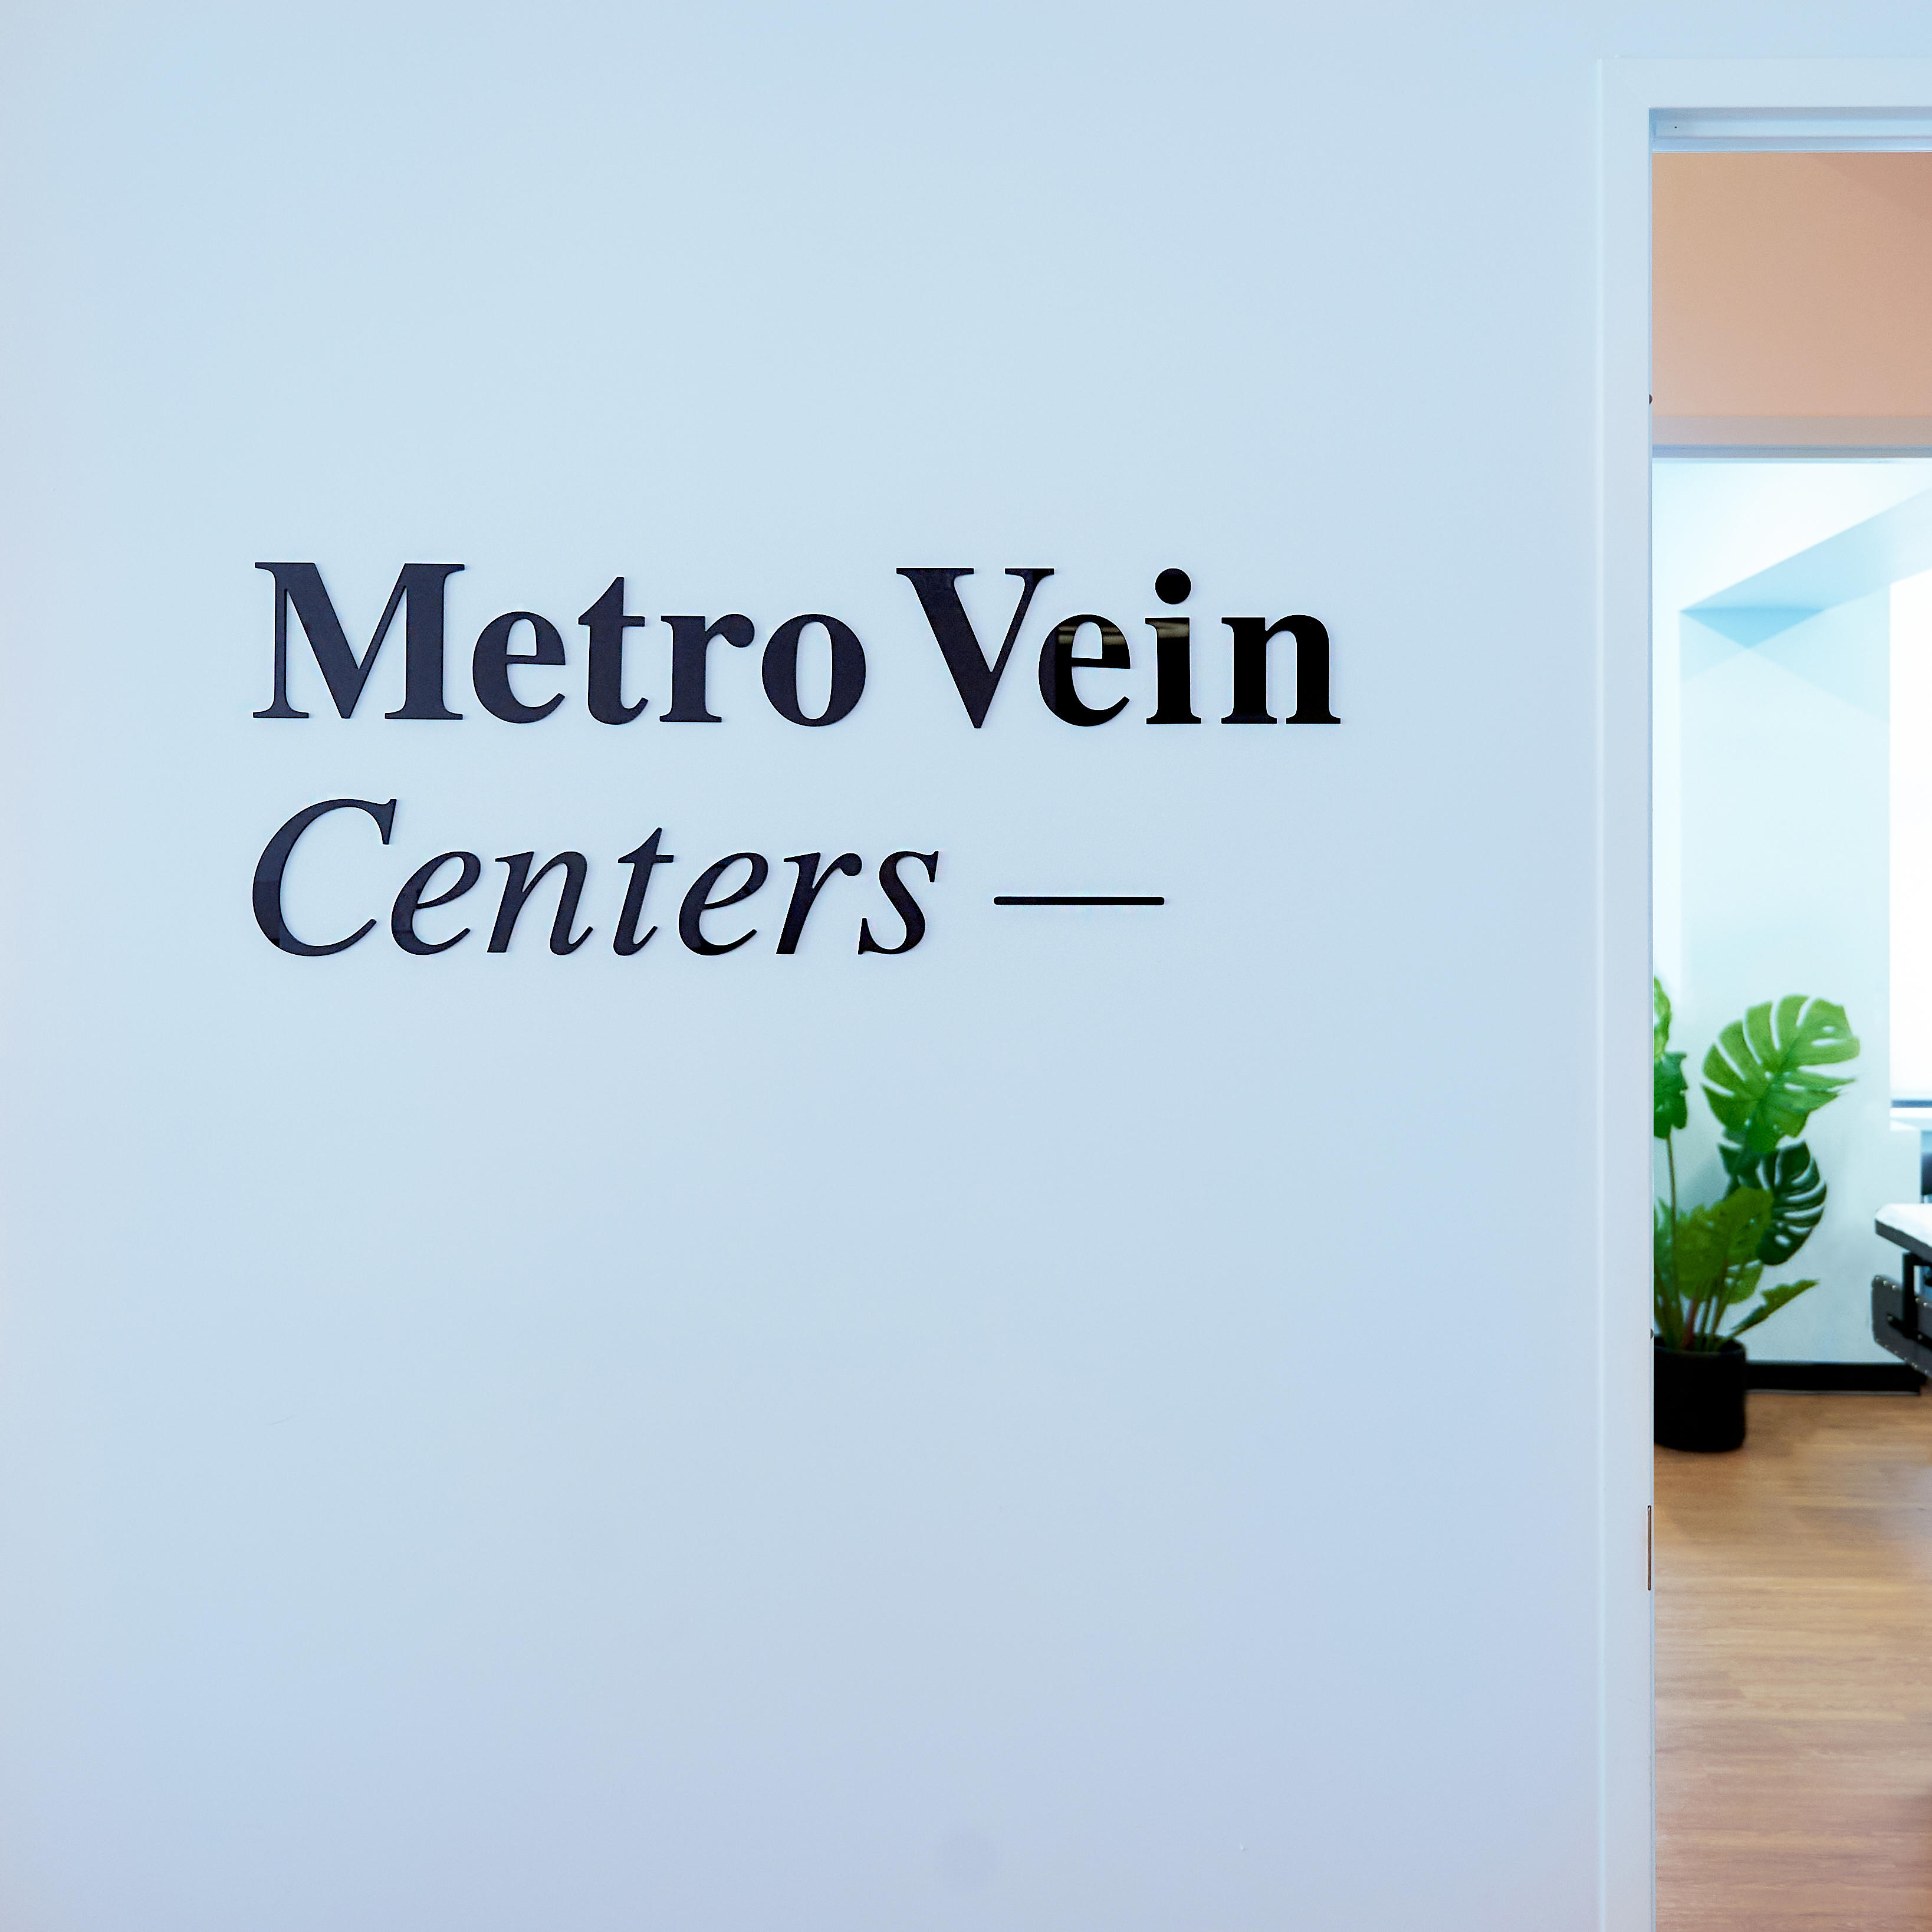 Nationally accredited vein clinics in New York, New Jersey, Michigan, Connecticut, and Texas.